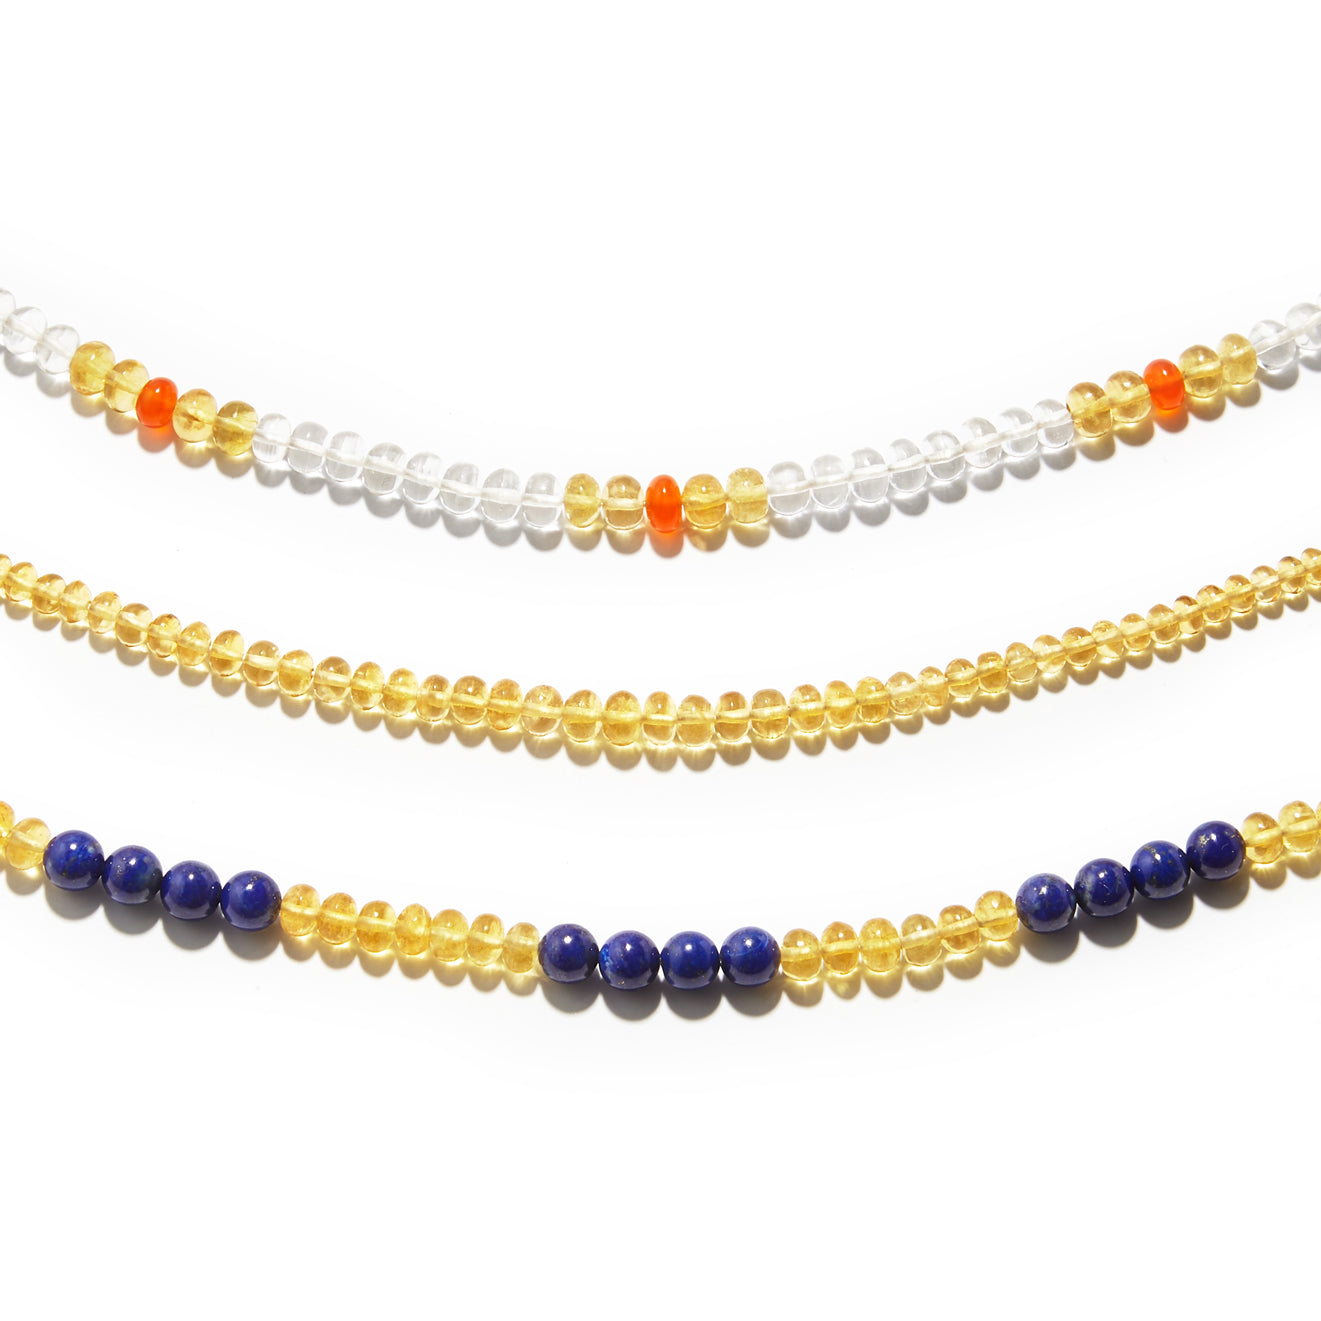 Three crystal healing necklaces with golden beryl 